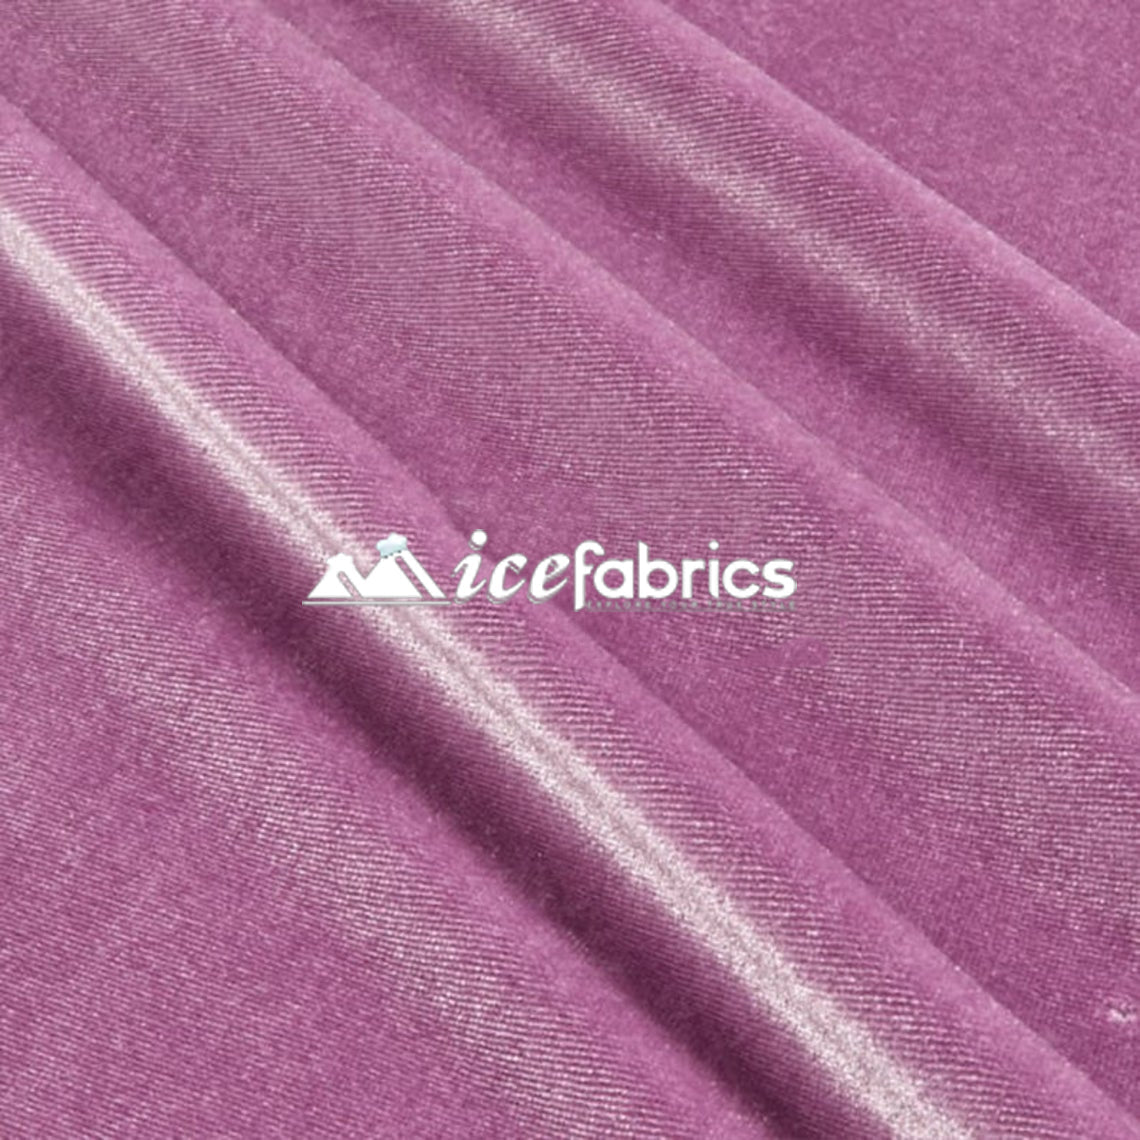 Lilac Velvet Fabric By The Yard | 4 Way StretchVelvet FabricICE FABRICSICE FABRICSBy The Yard (58" Wide)Lilac Velvet Fabric By The Yard | 4 Way Stretch ICE FABRICS